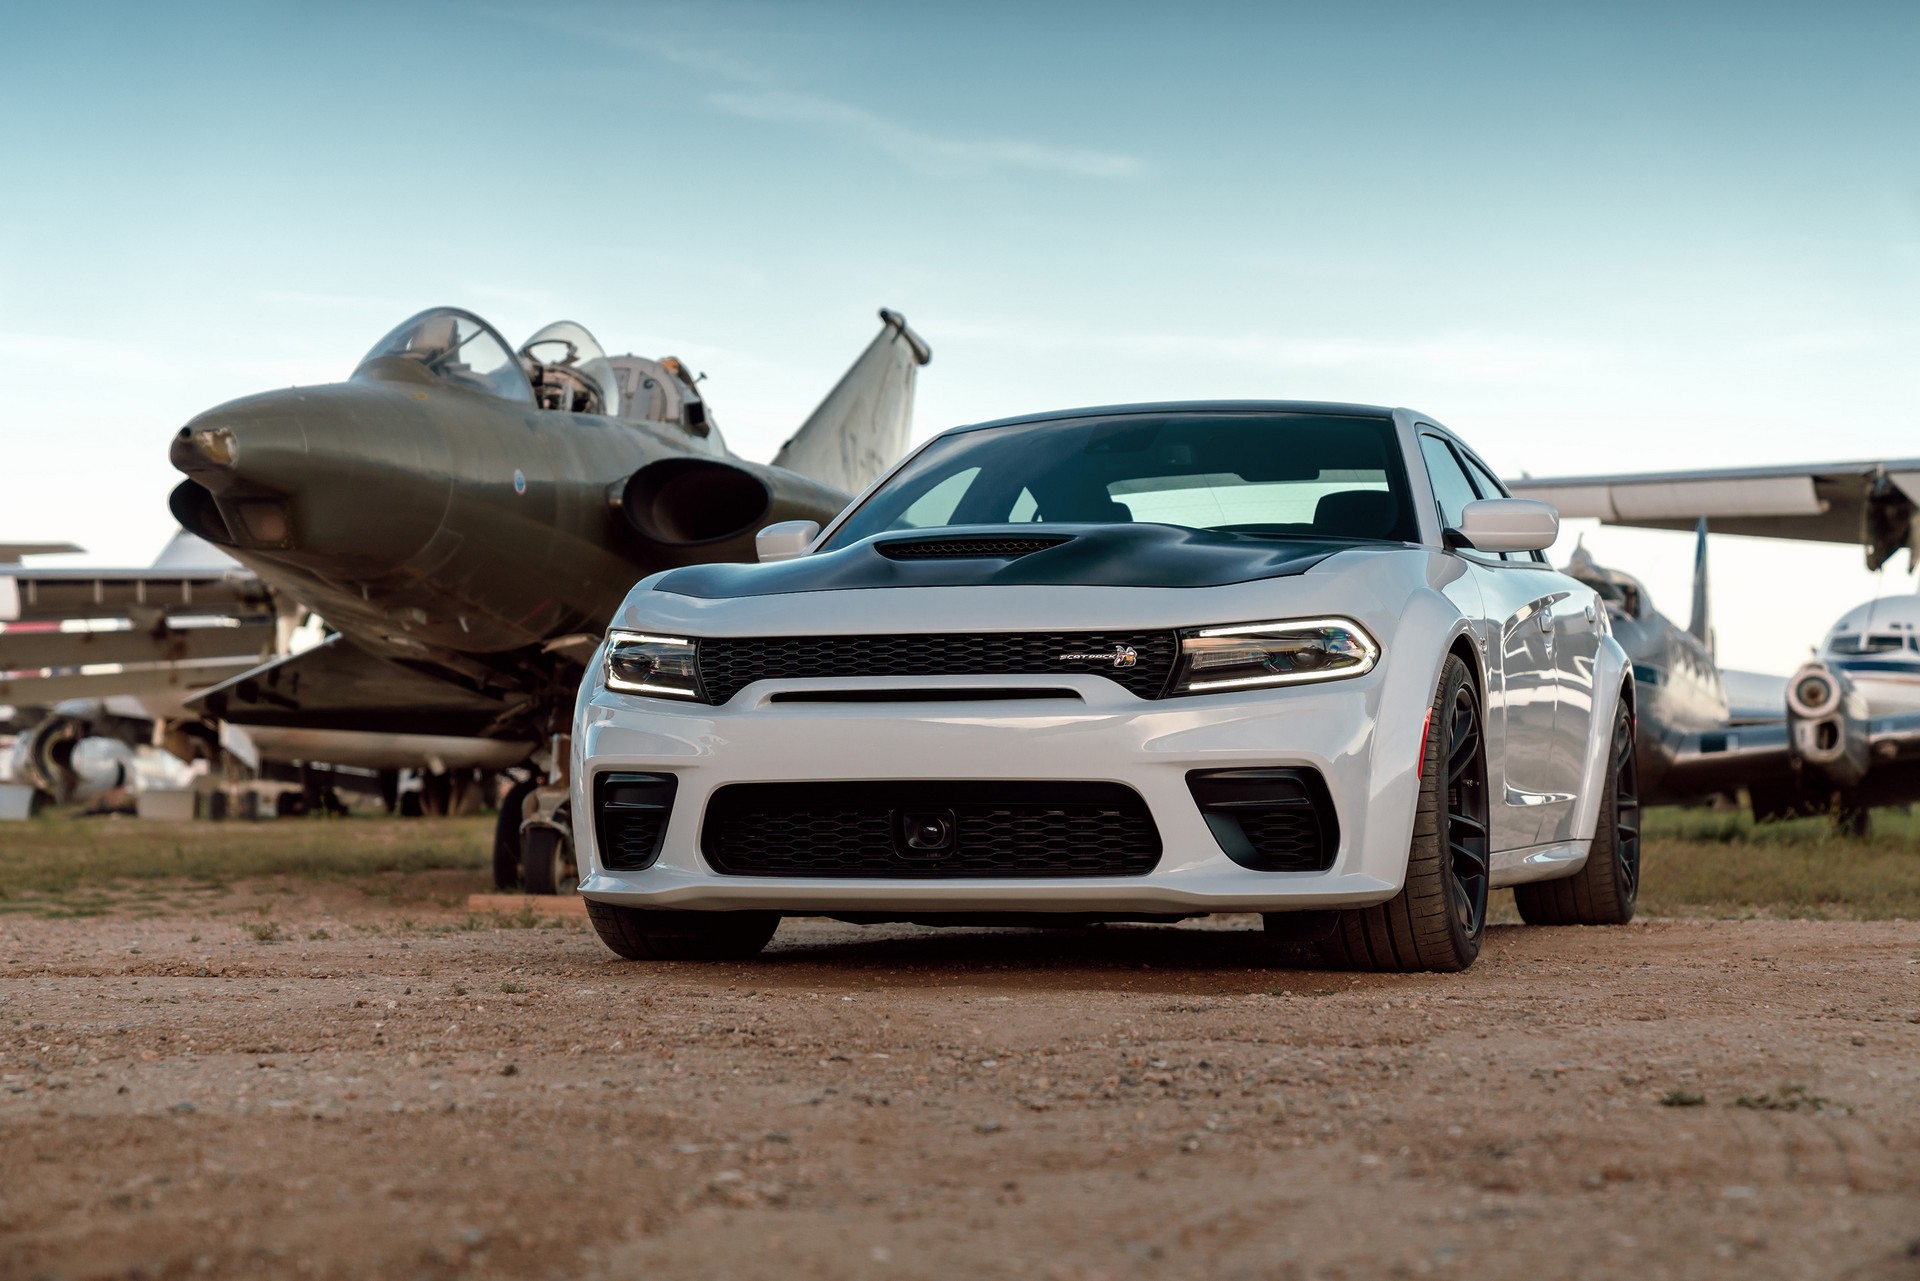 2023 Dodge Charger Super Bee “Last Call” Special Edition Limited to